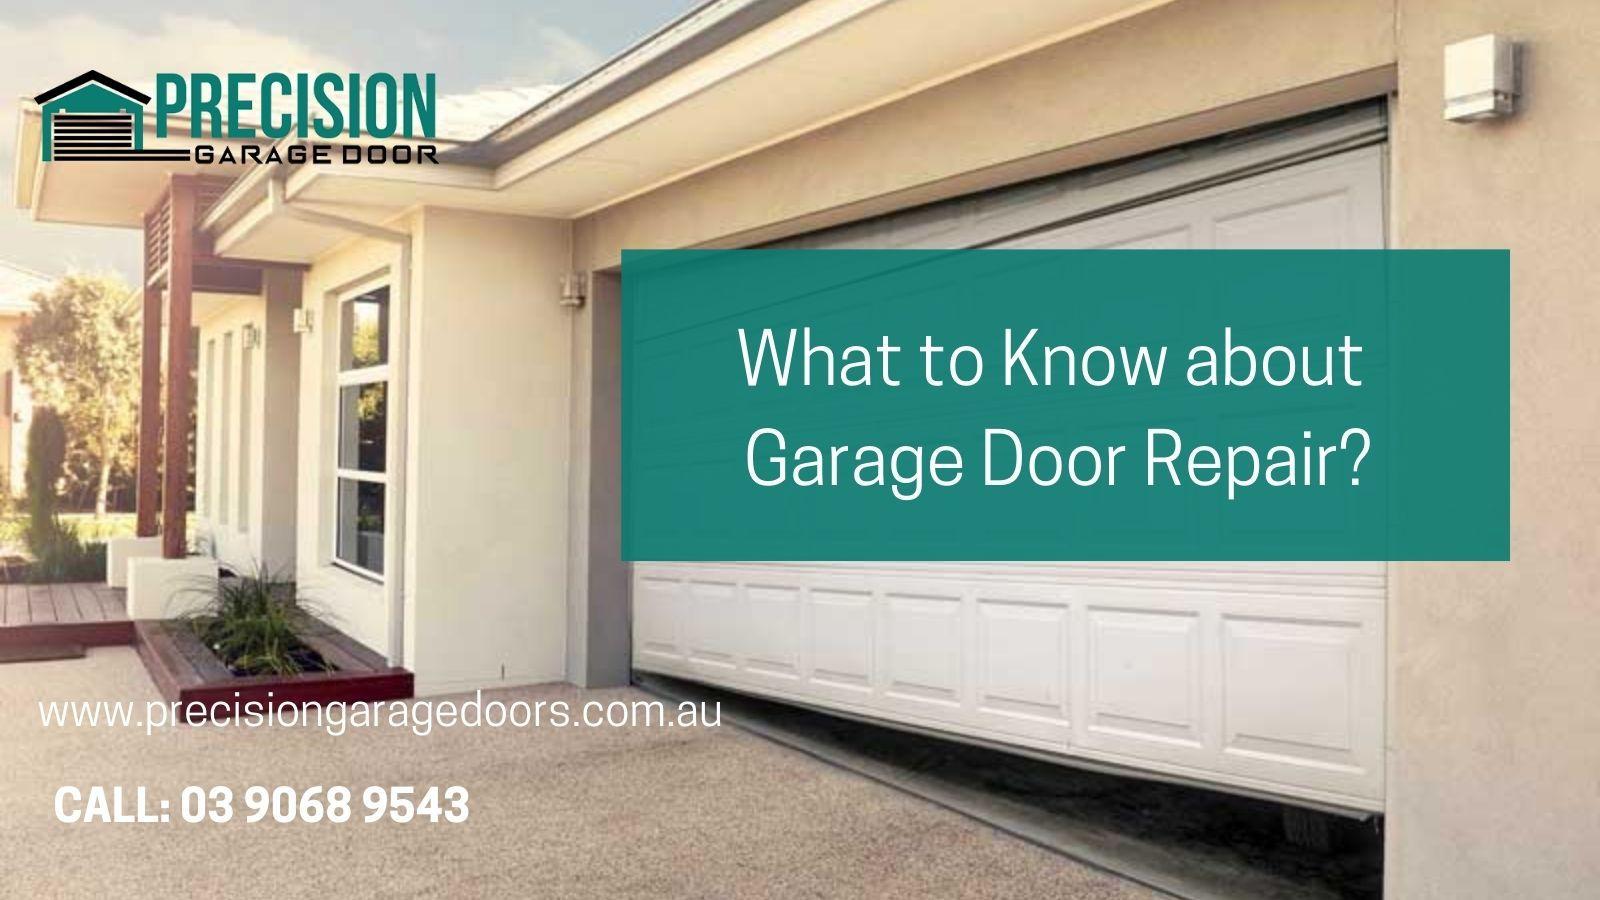 What to Know about Garage Door Repair